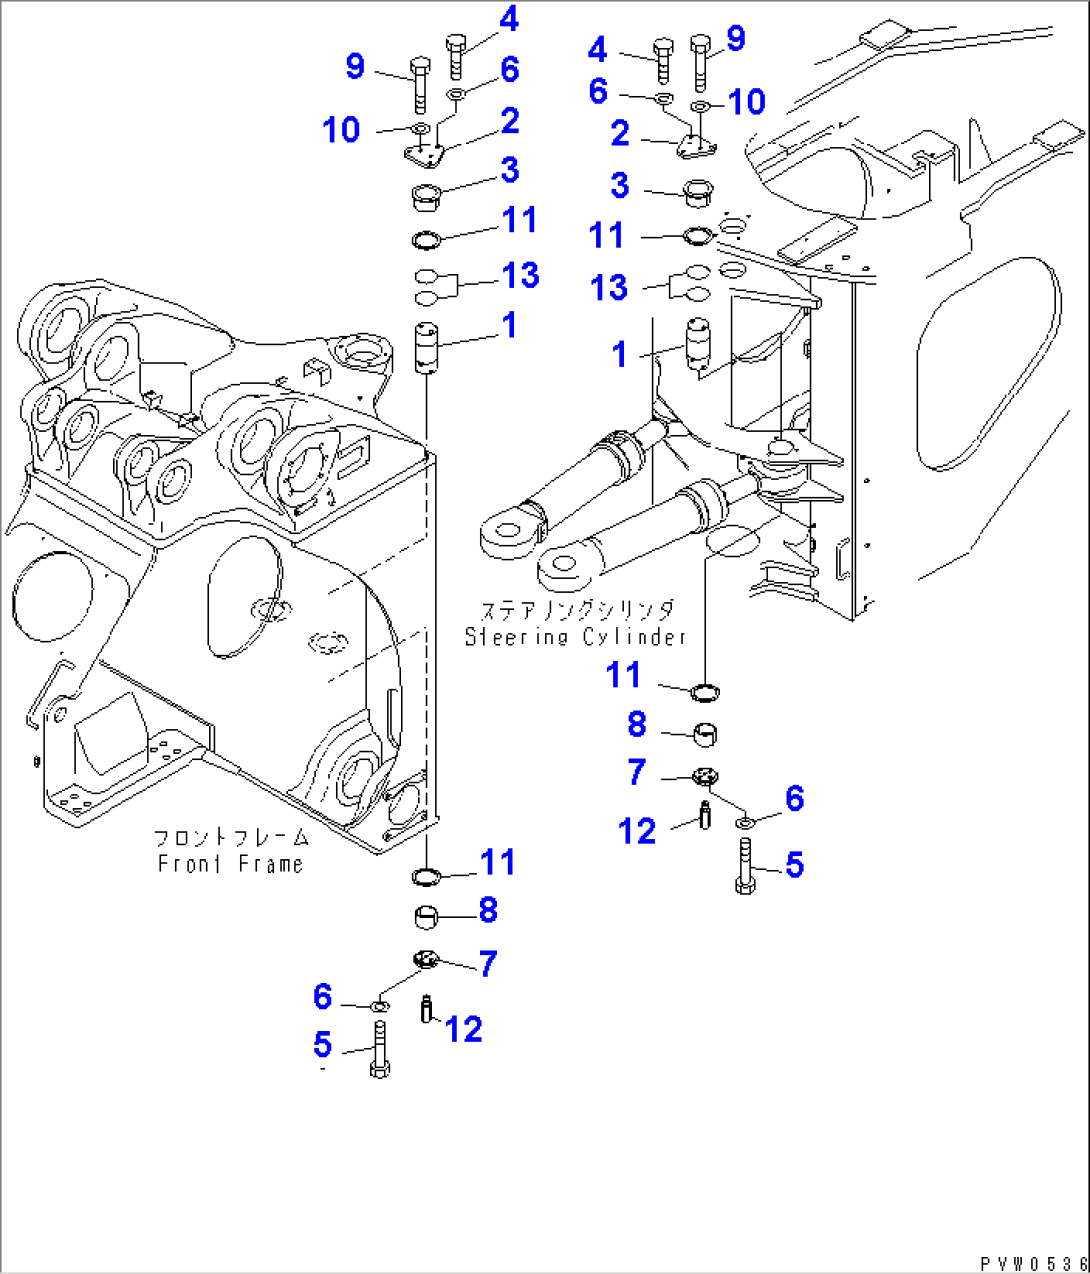 REAR FRAME (STEERING CYLINDER MOUNTING PARTS)